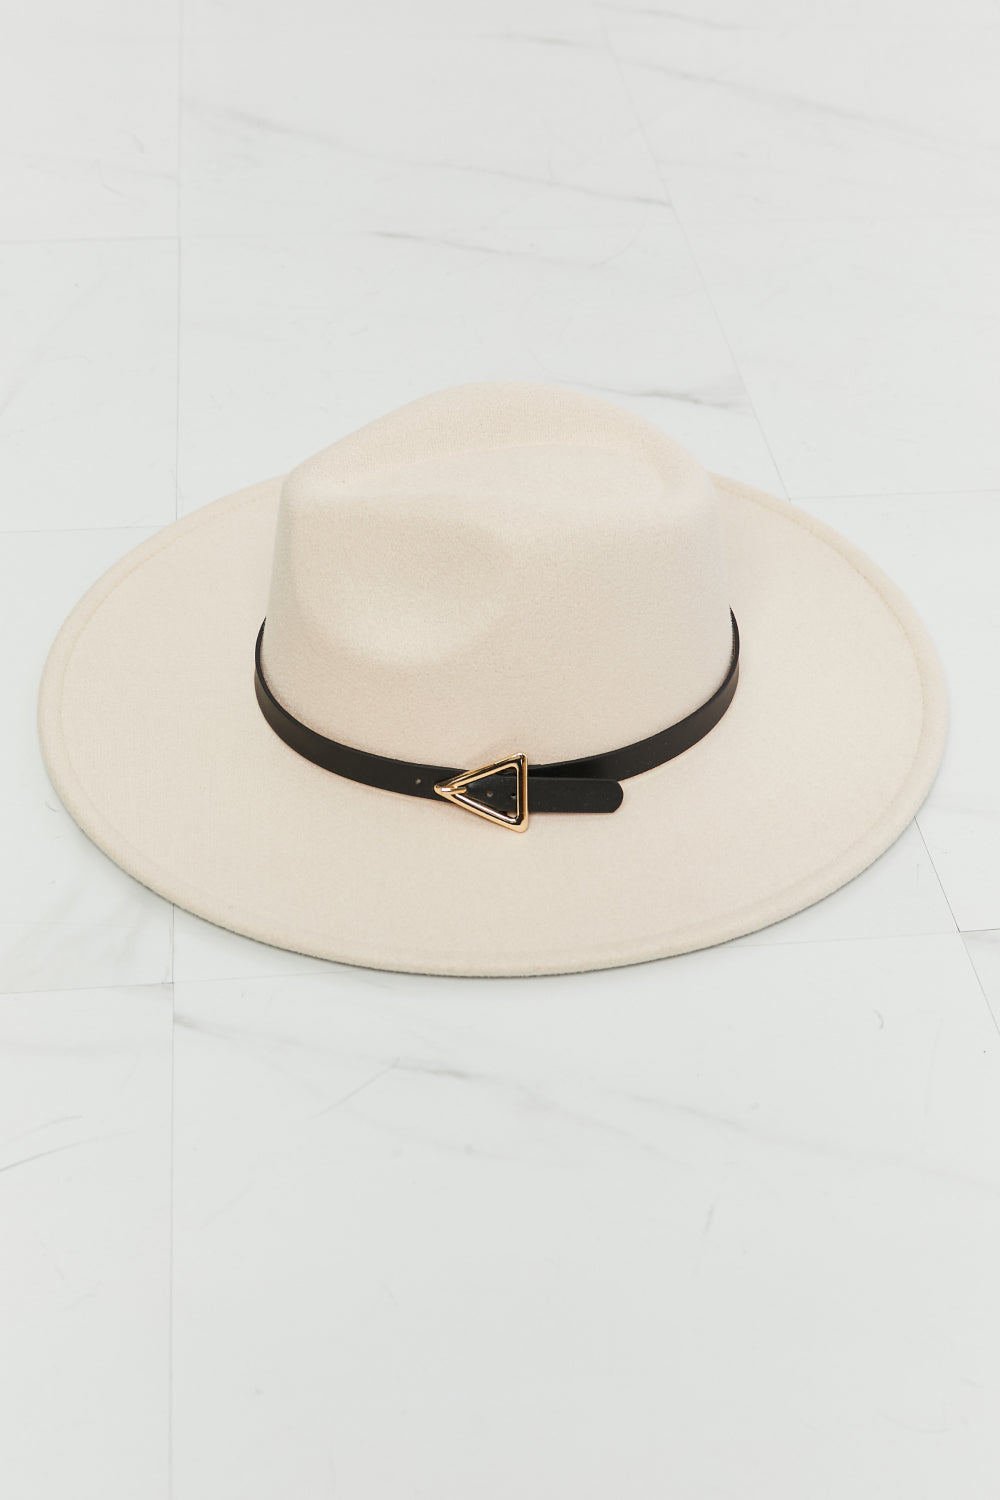 Fame Ride Along Fedora Hat - Online Only